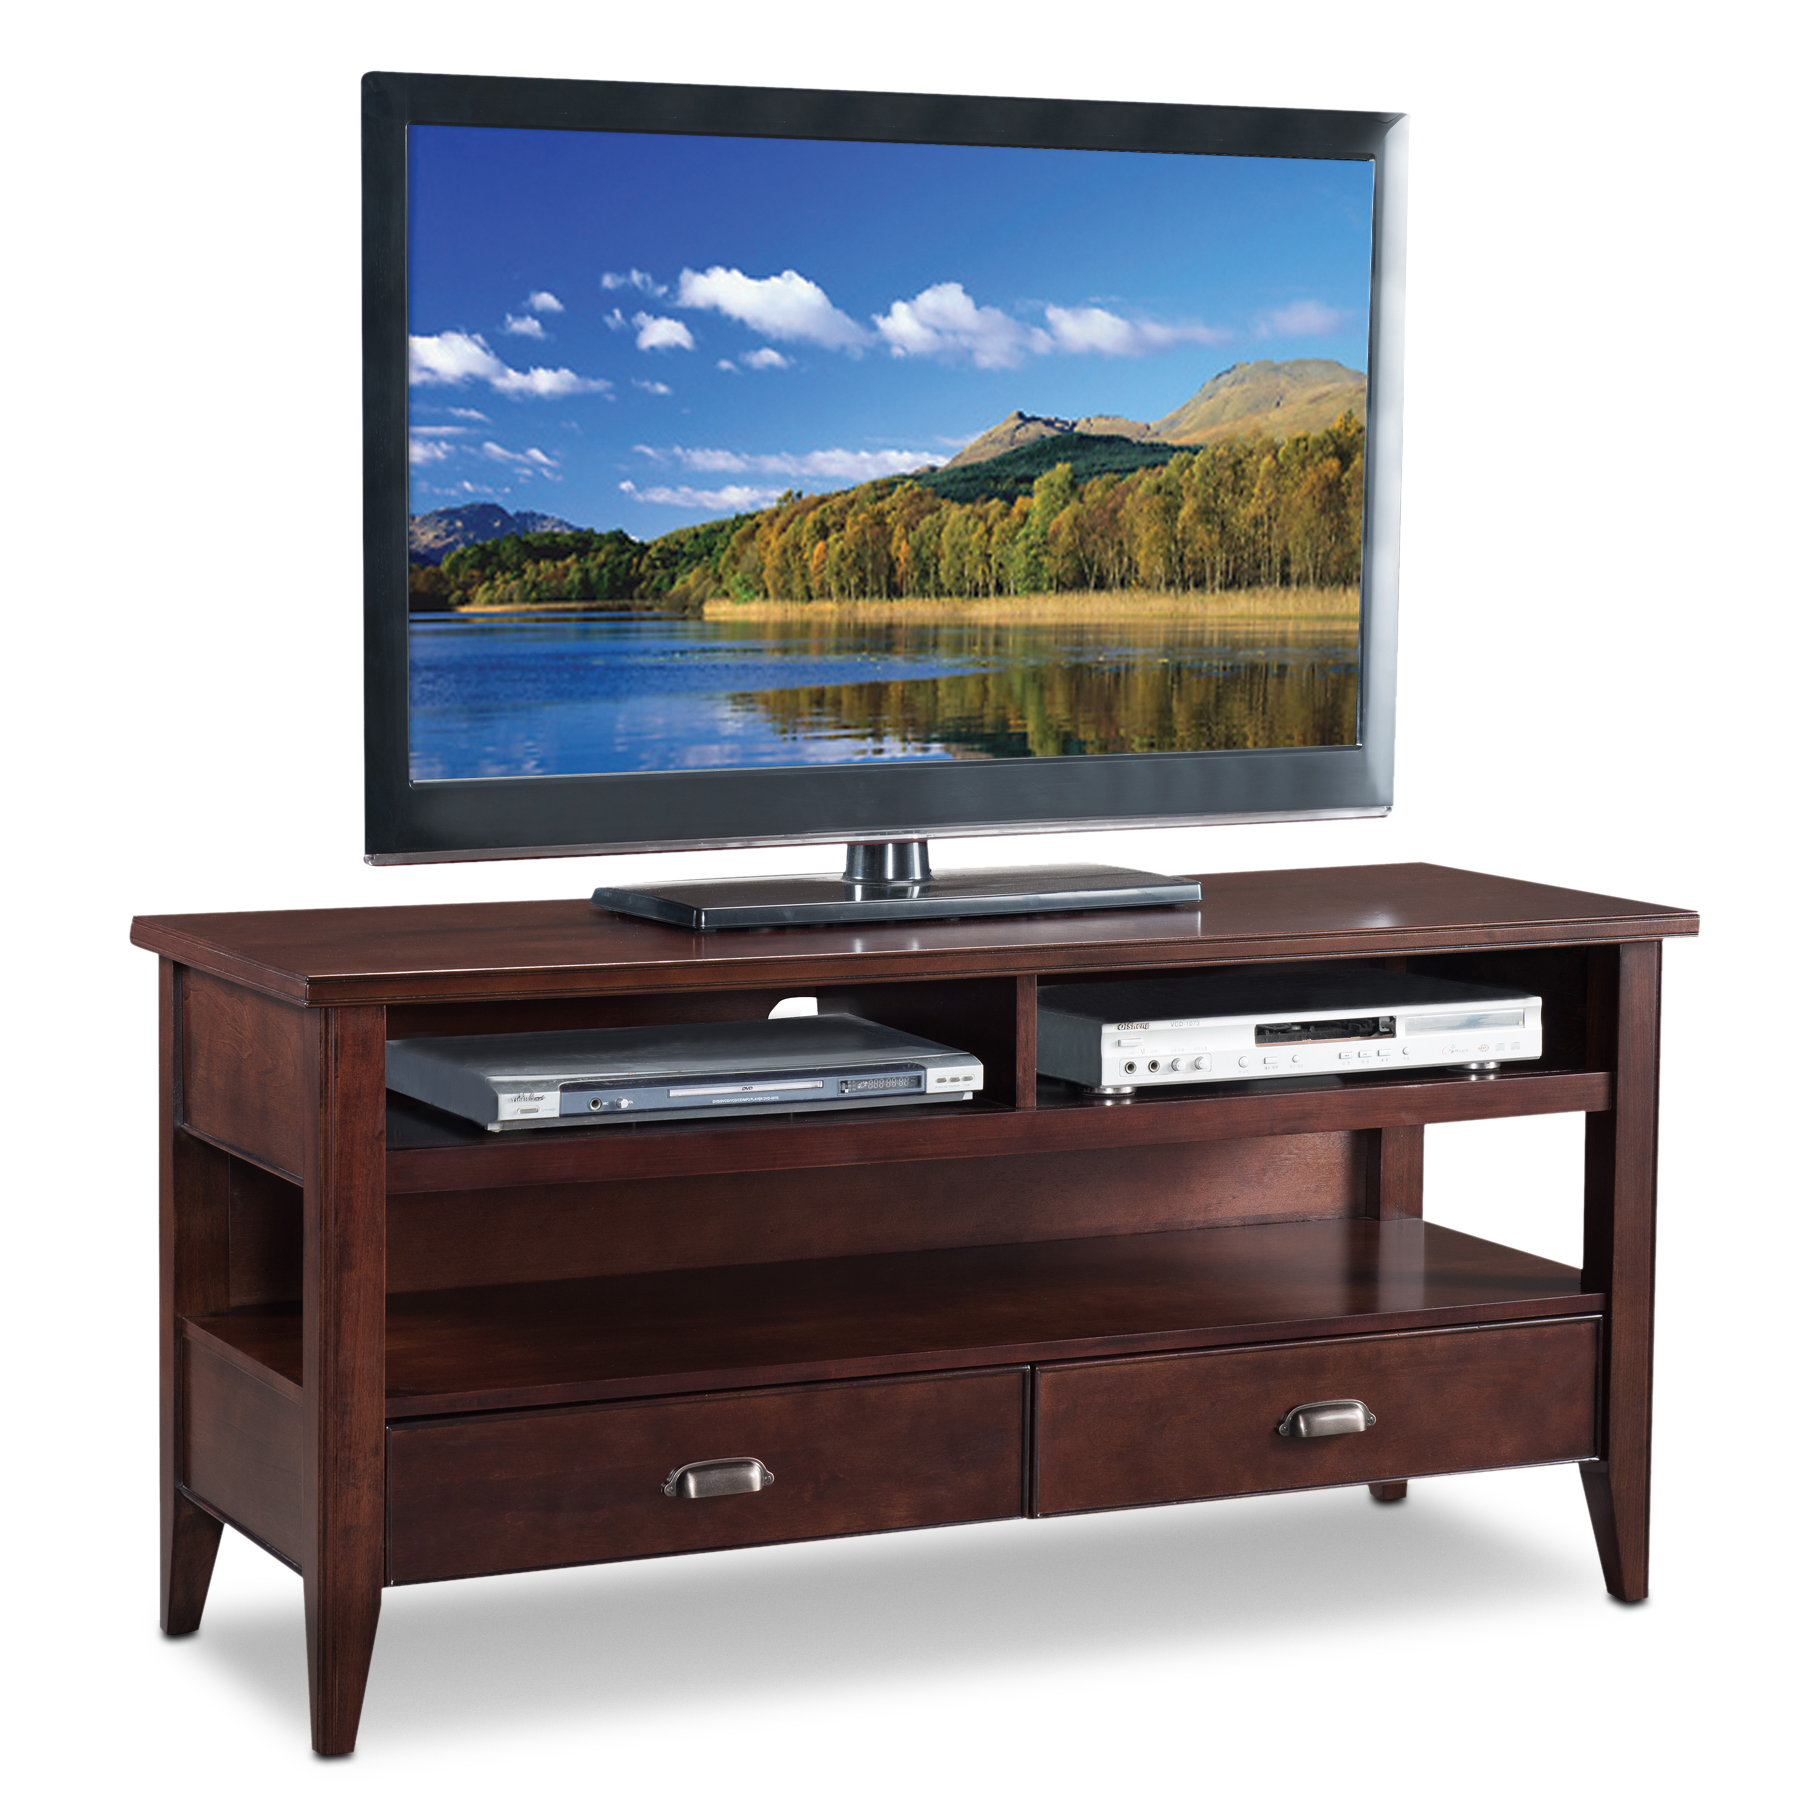 Leick Laurent 50" TV Stand